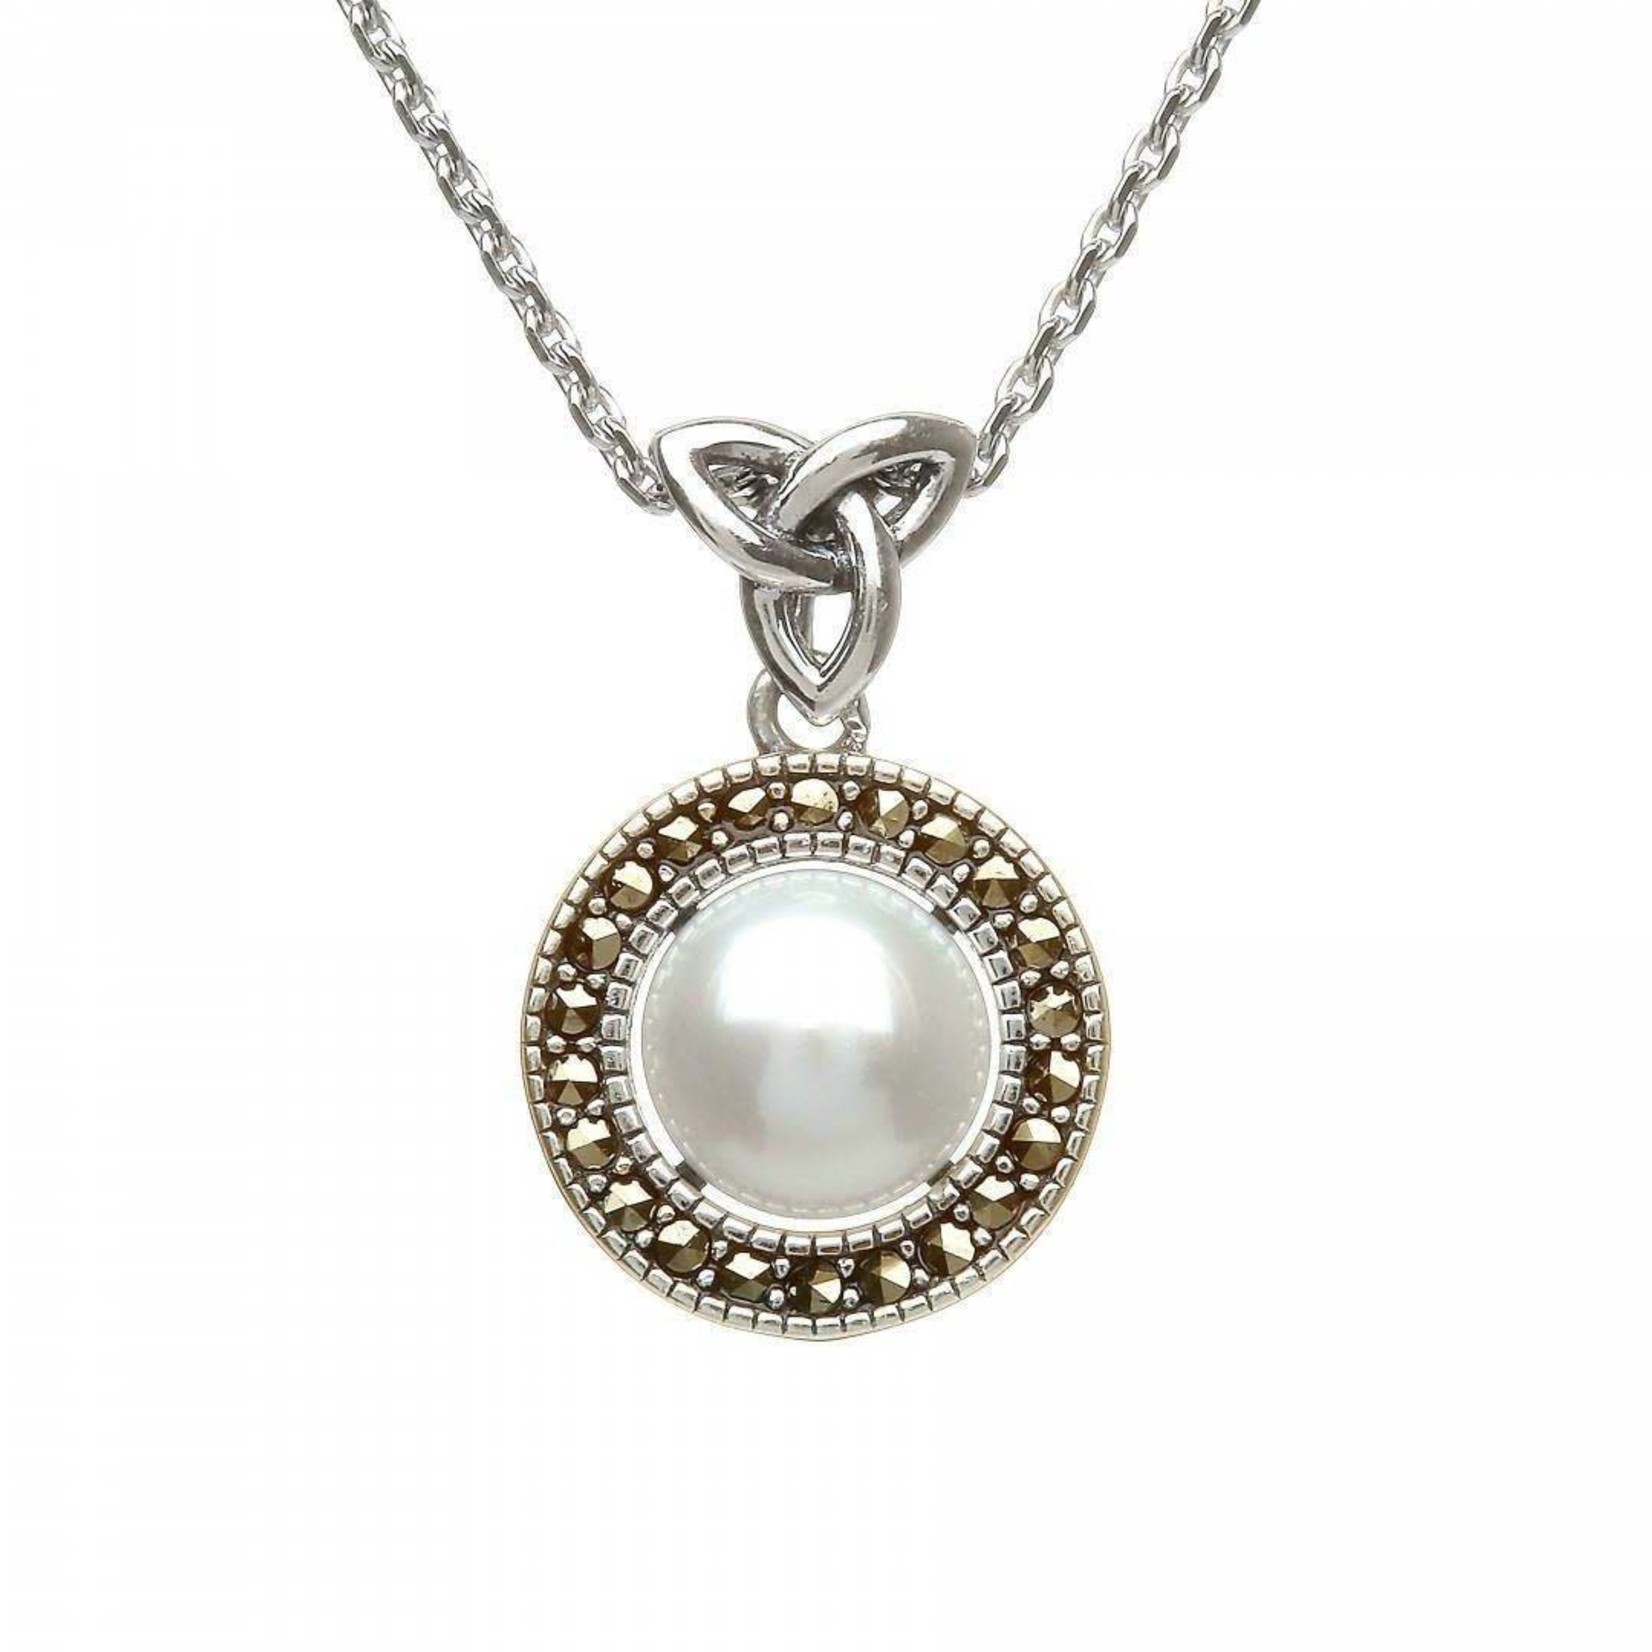 Anu S/S Marcasite Fresh Water Pearl Trinty Necklace